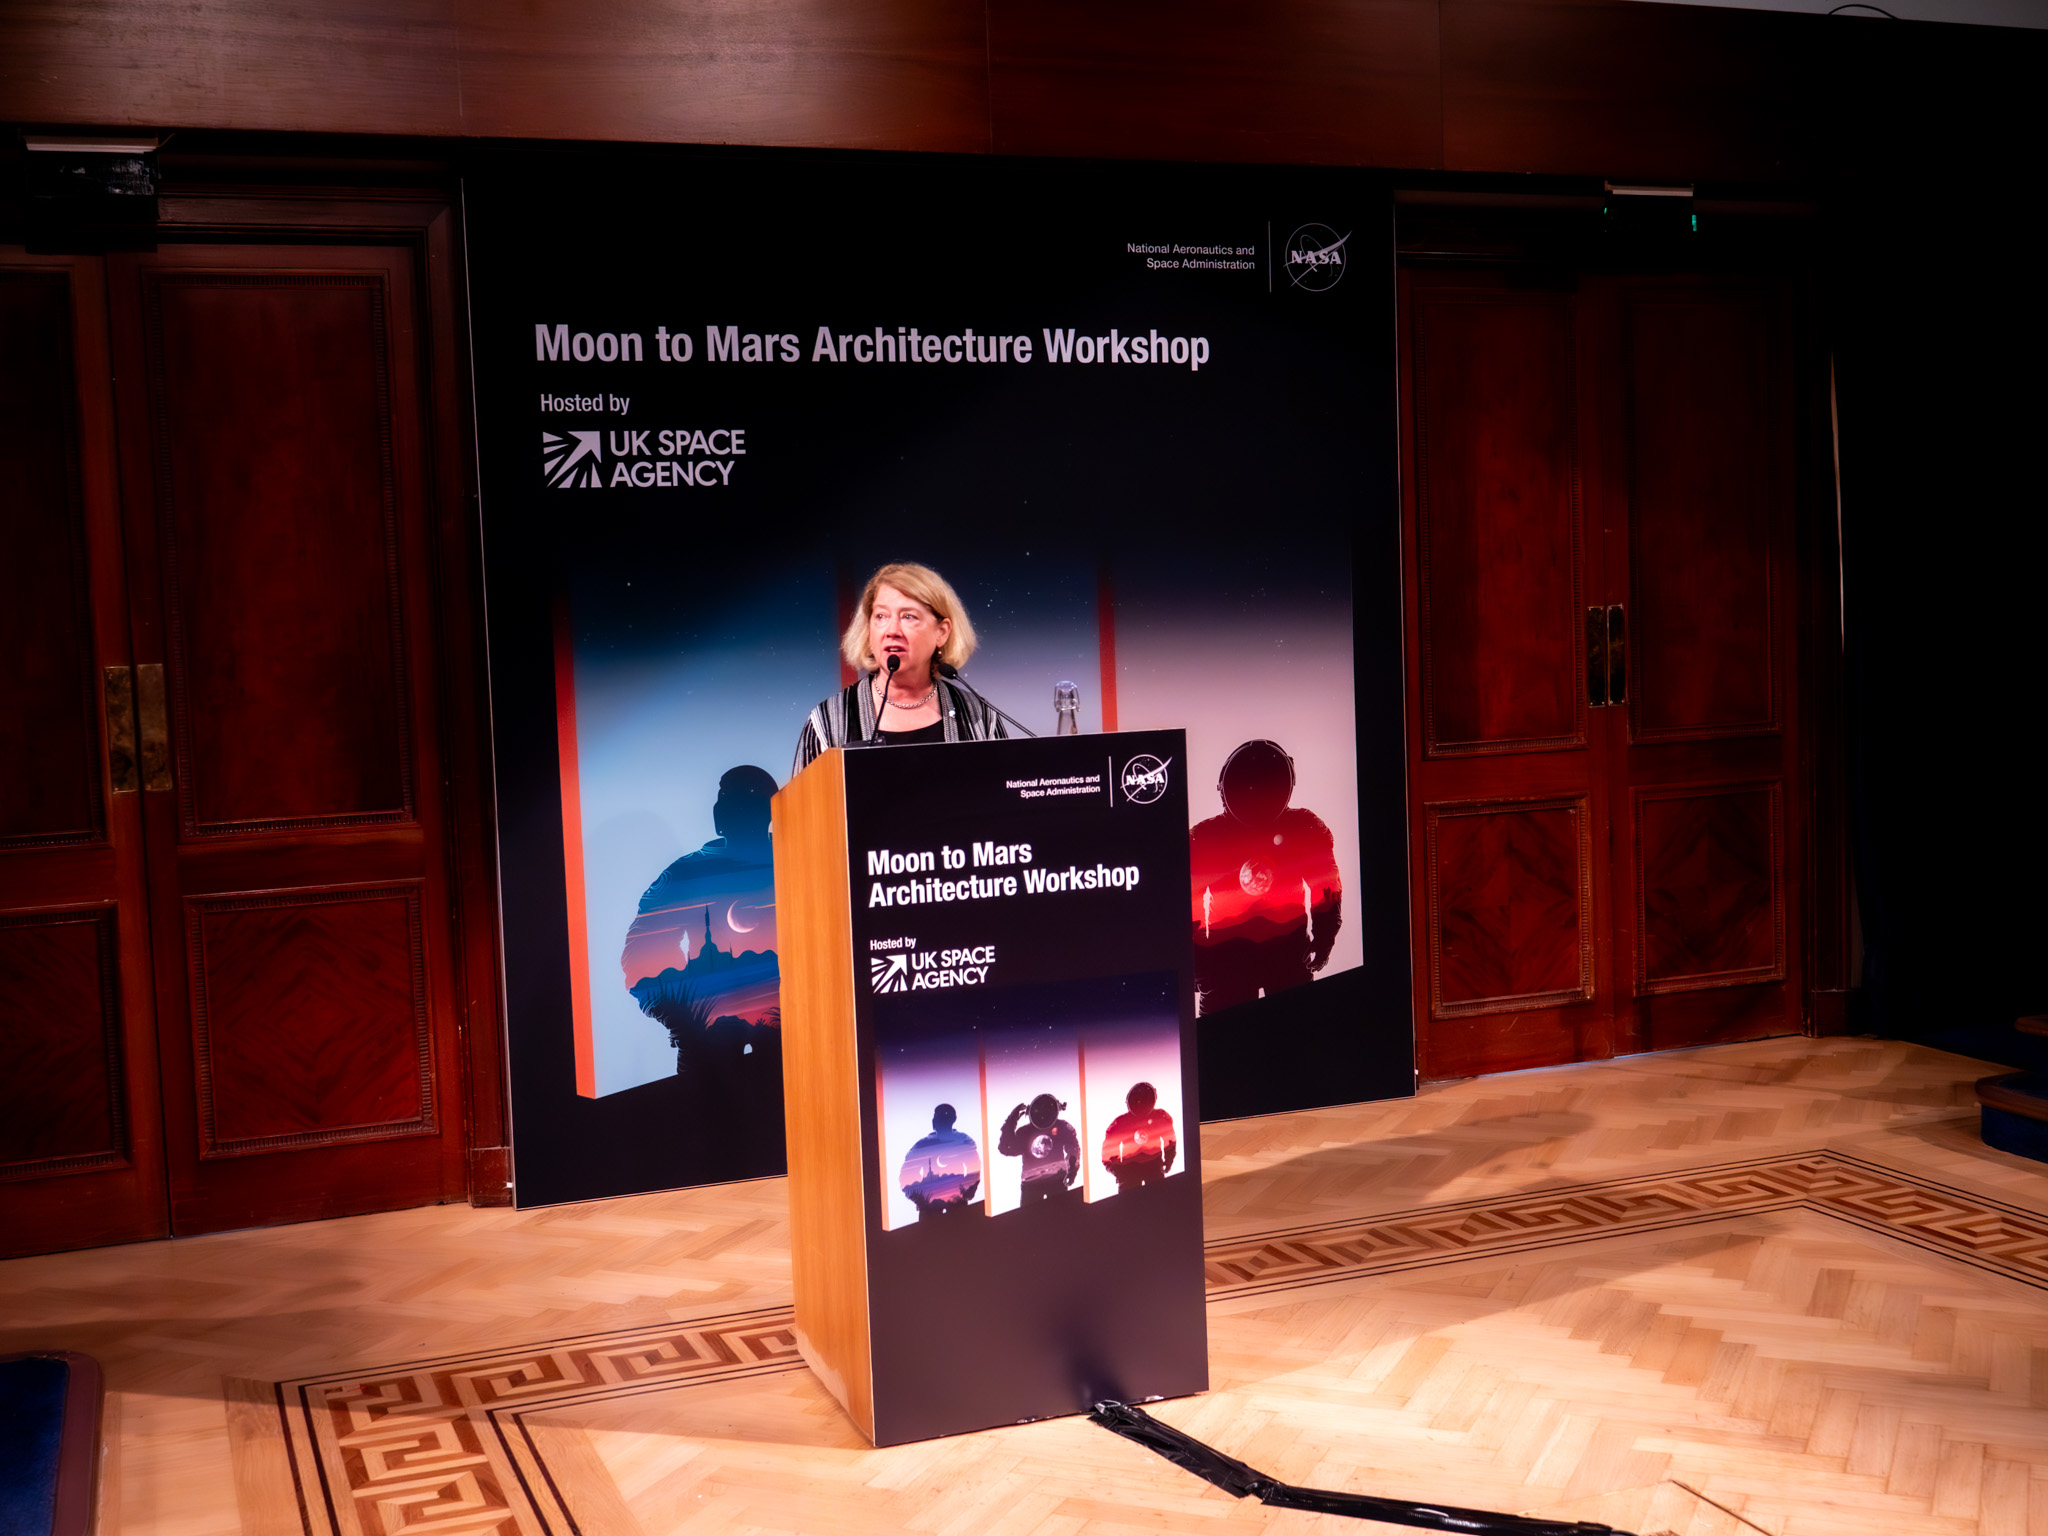 NASA Deputy Administrator Pam Melroy speaking at the Moon to Mars Architecture workshop at the Royal Institution, London.